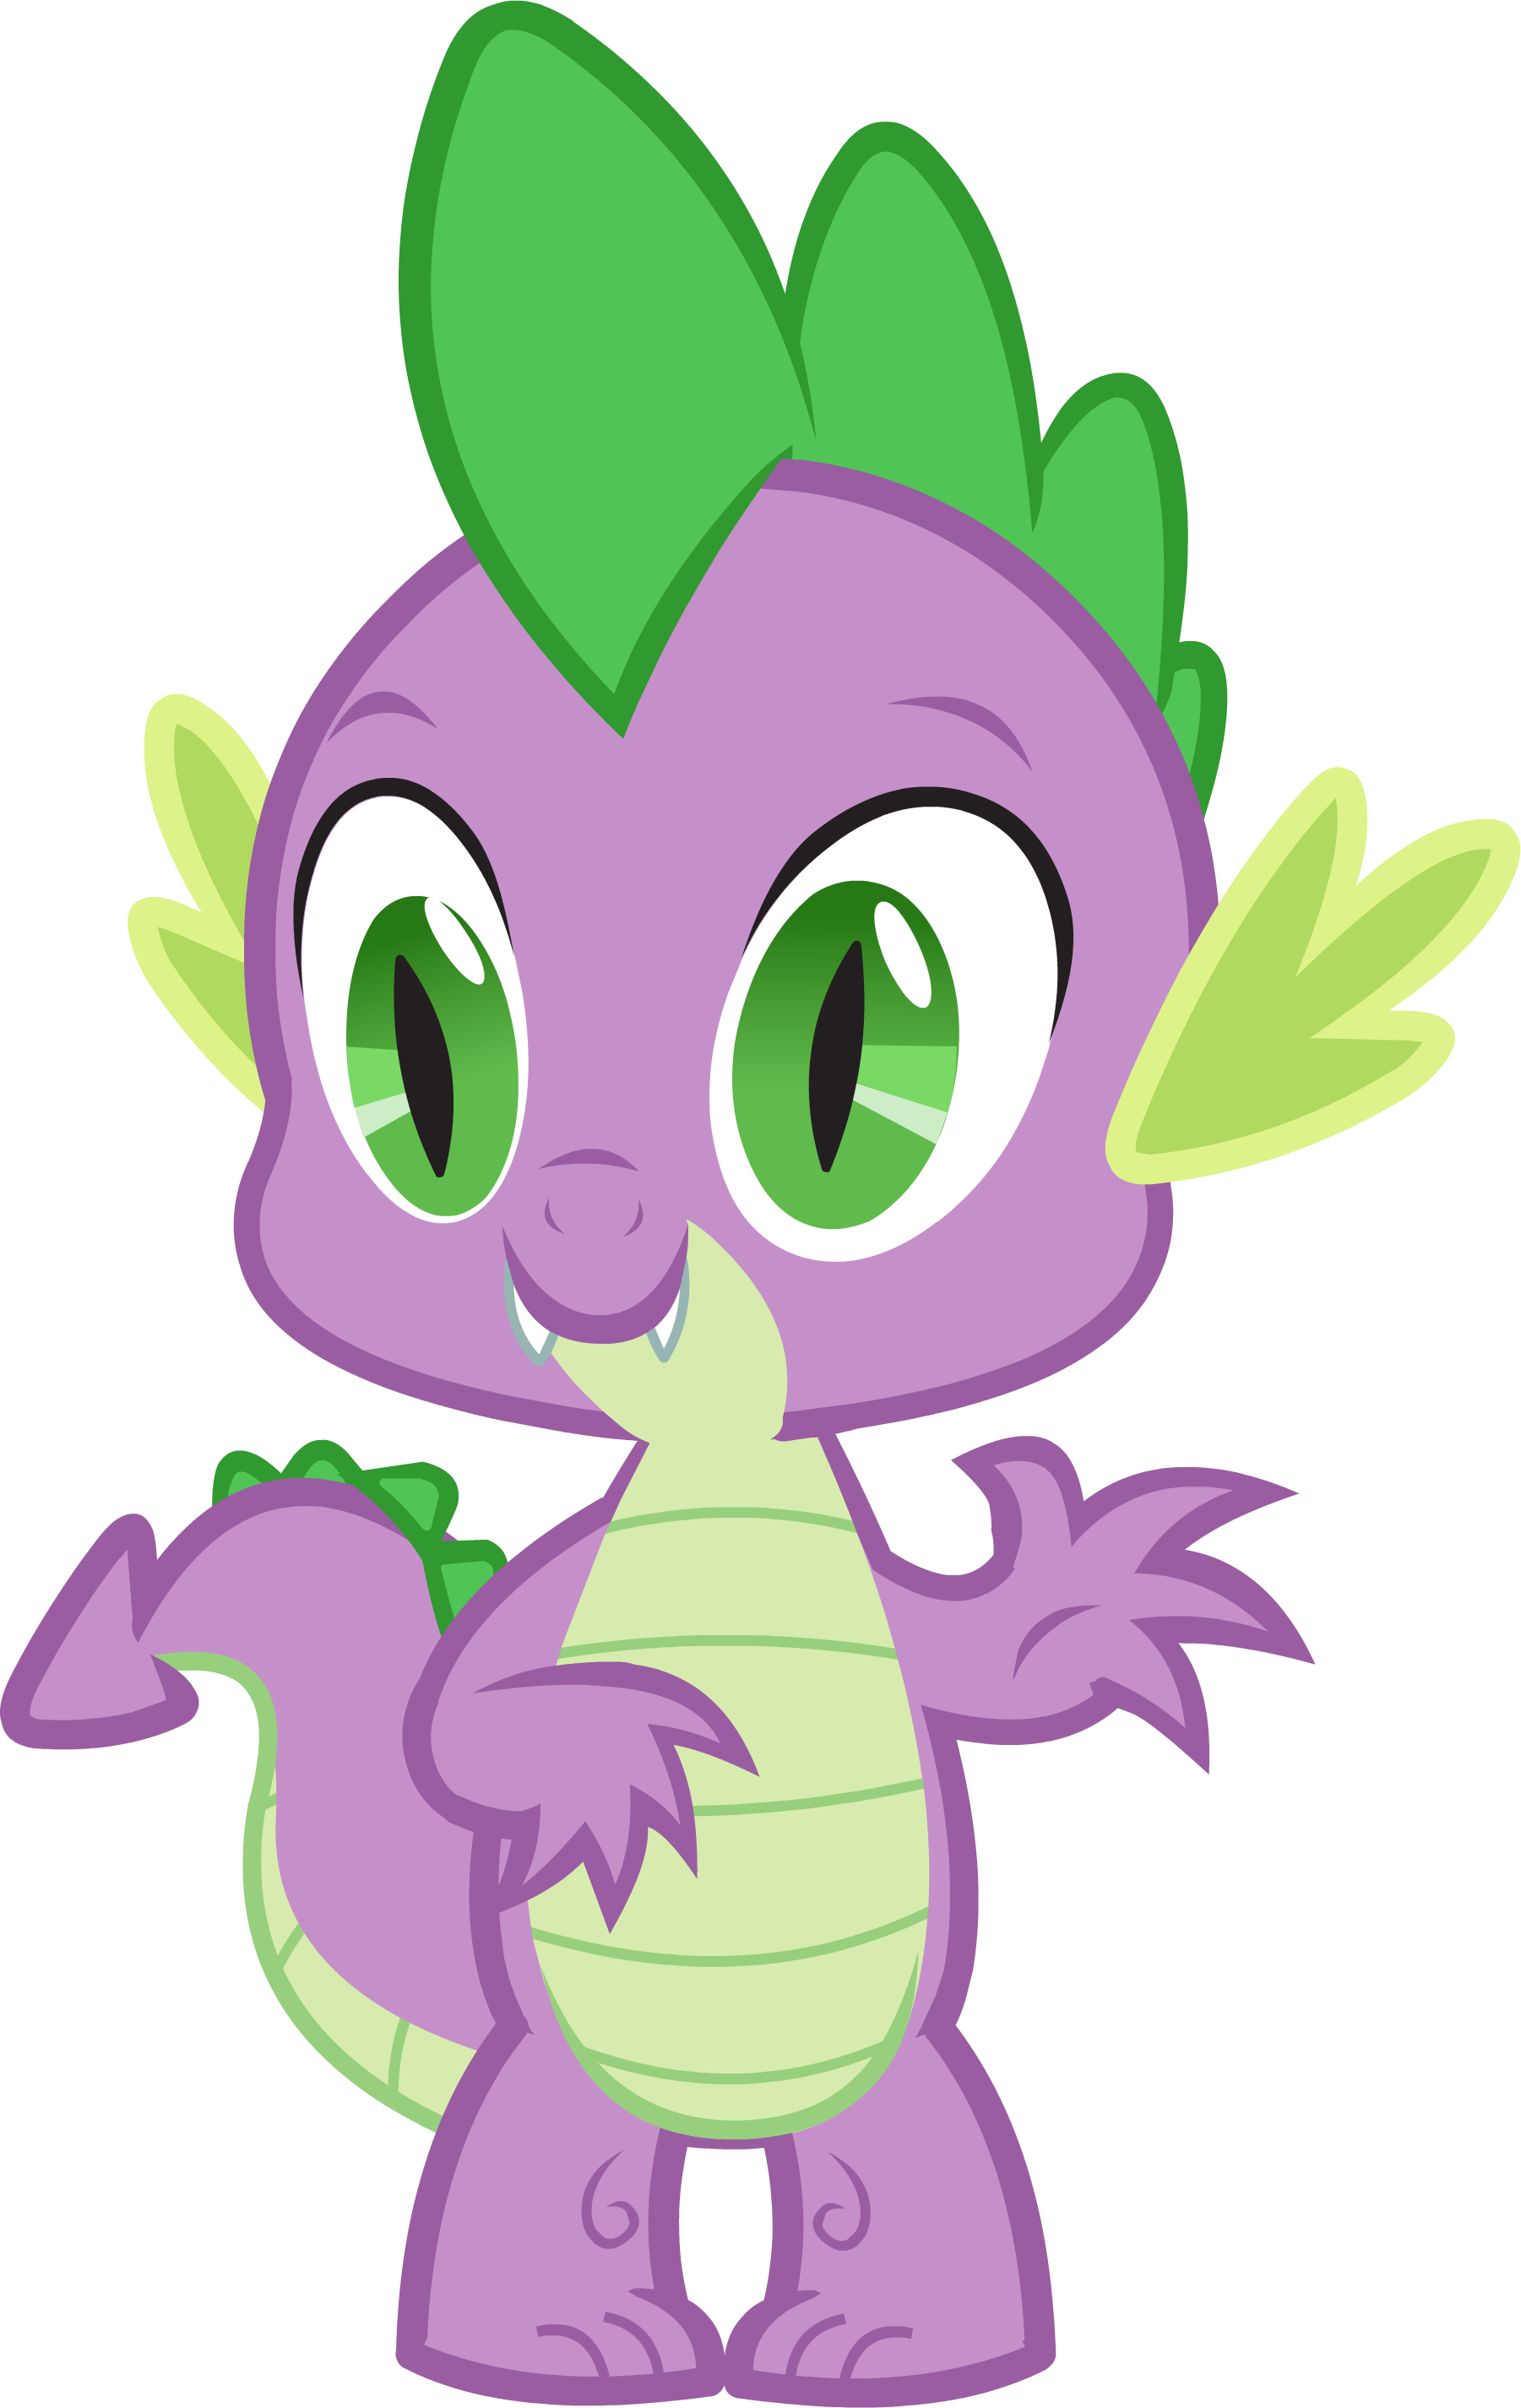 Wittle dragon drawing? - Art Requests - Legends of Equestria - Forum